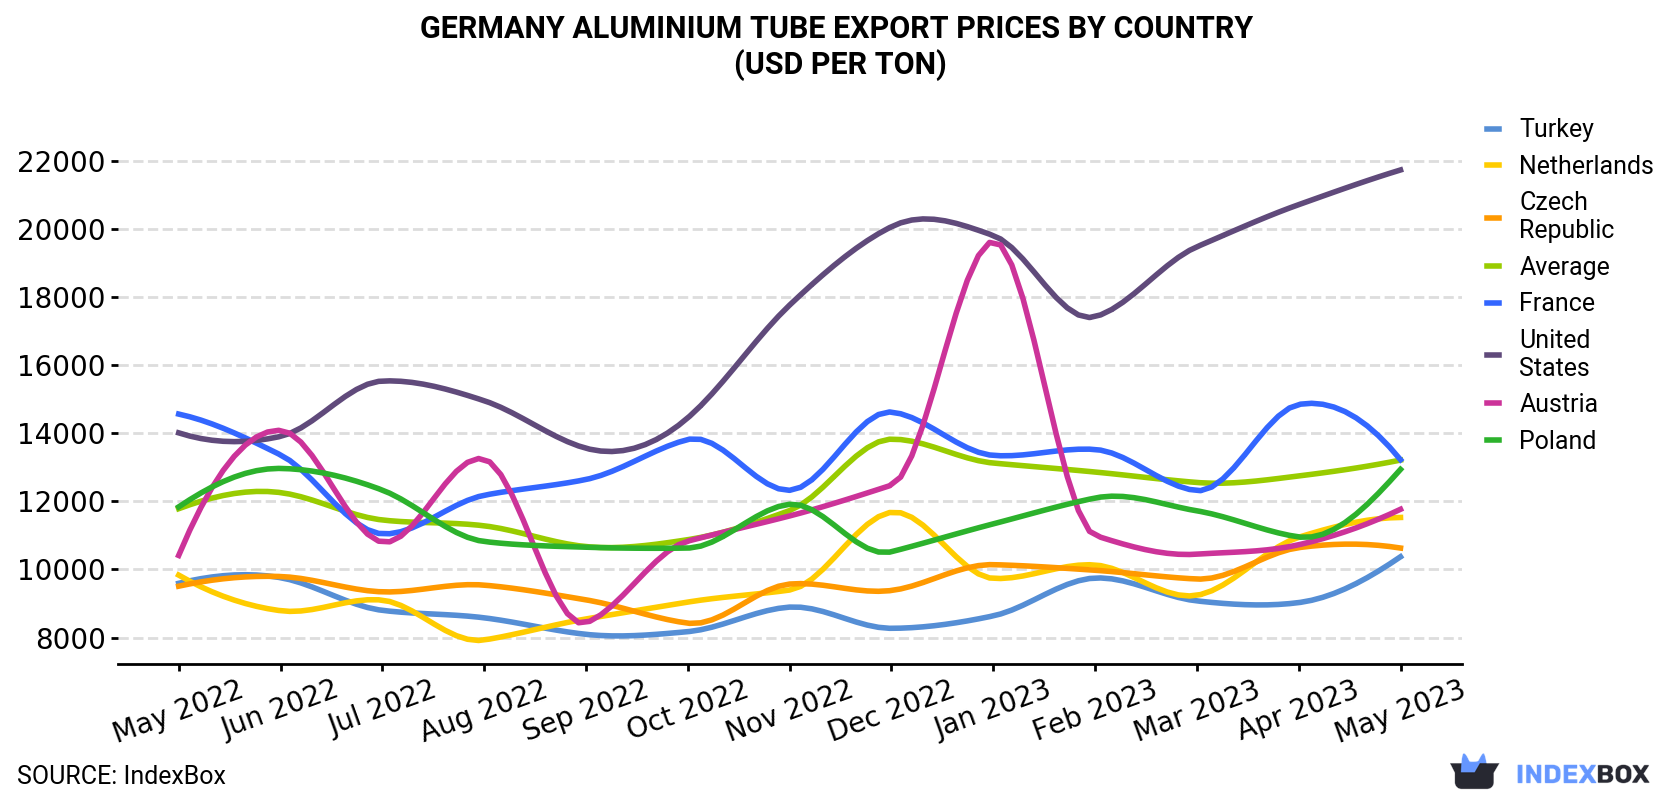 Germany Aluminium Tube Export Prices By Country (USD Per Ton)